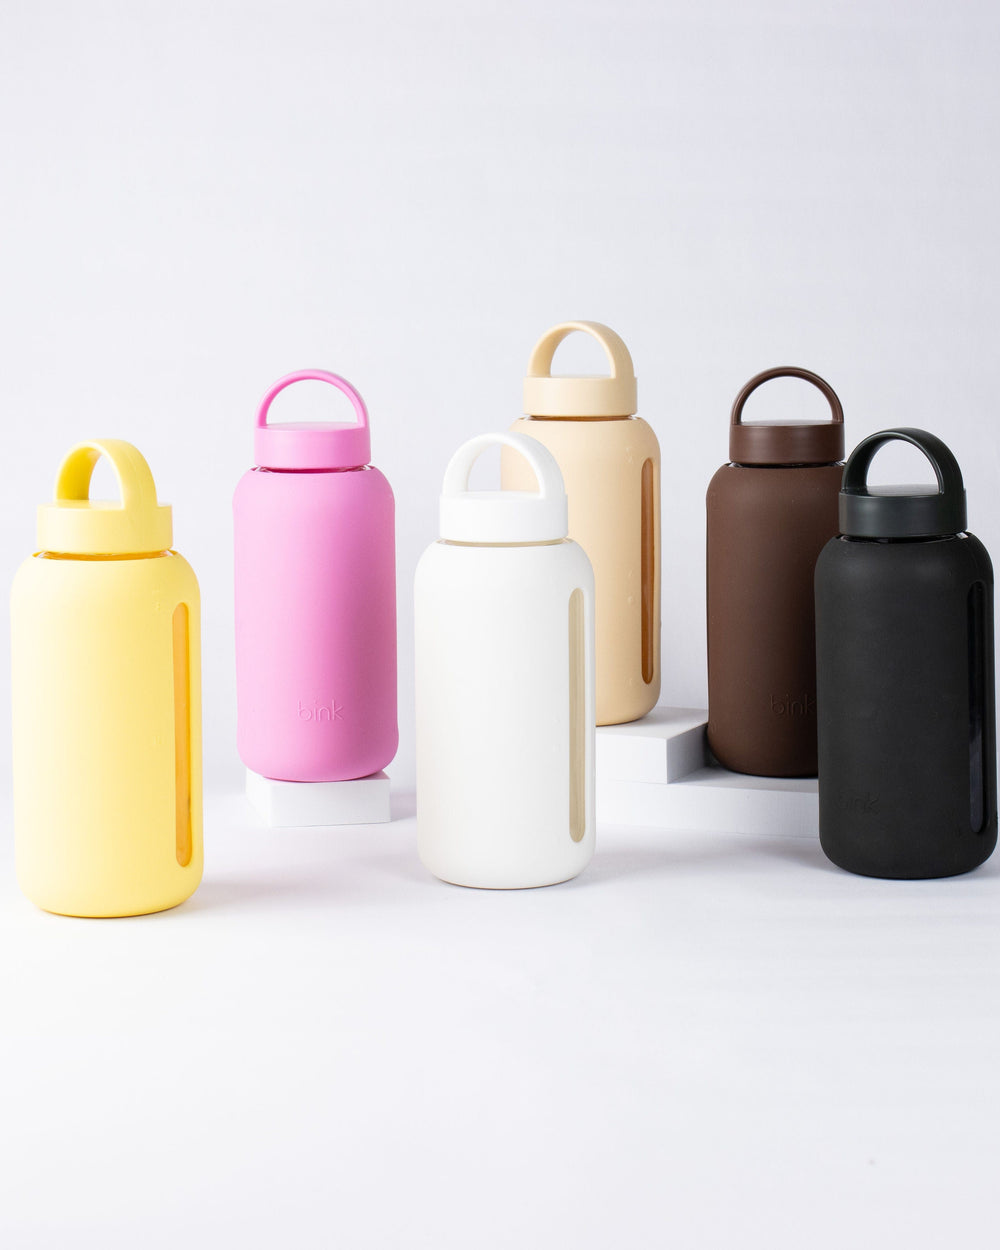 Day Bottle | The Hydration Tracking Water Bottle (27oz) - Coco bink Water Bottles Lil Tulips